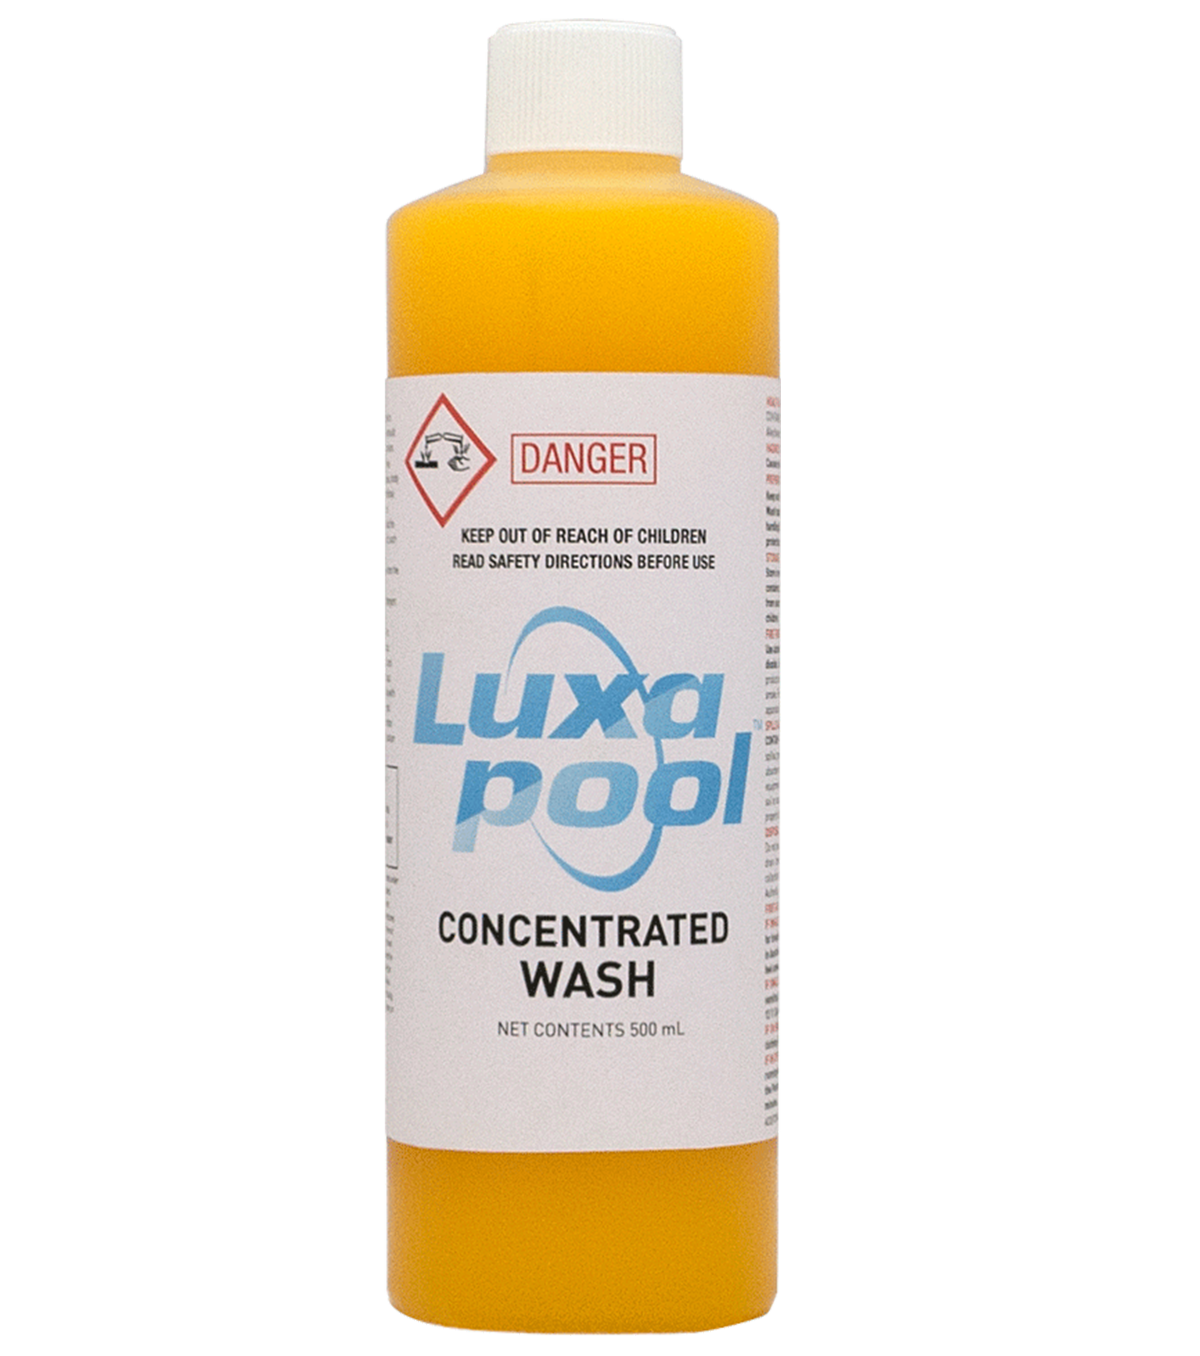 Luxapool Concentrated Wash